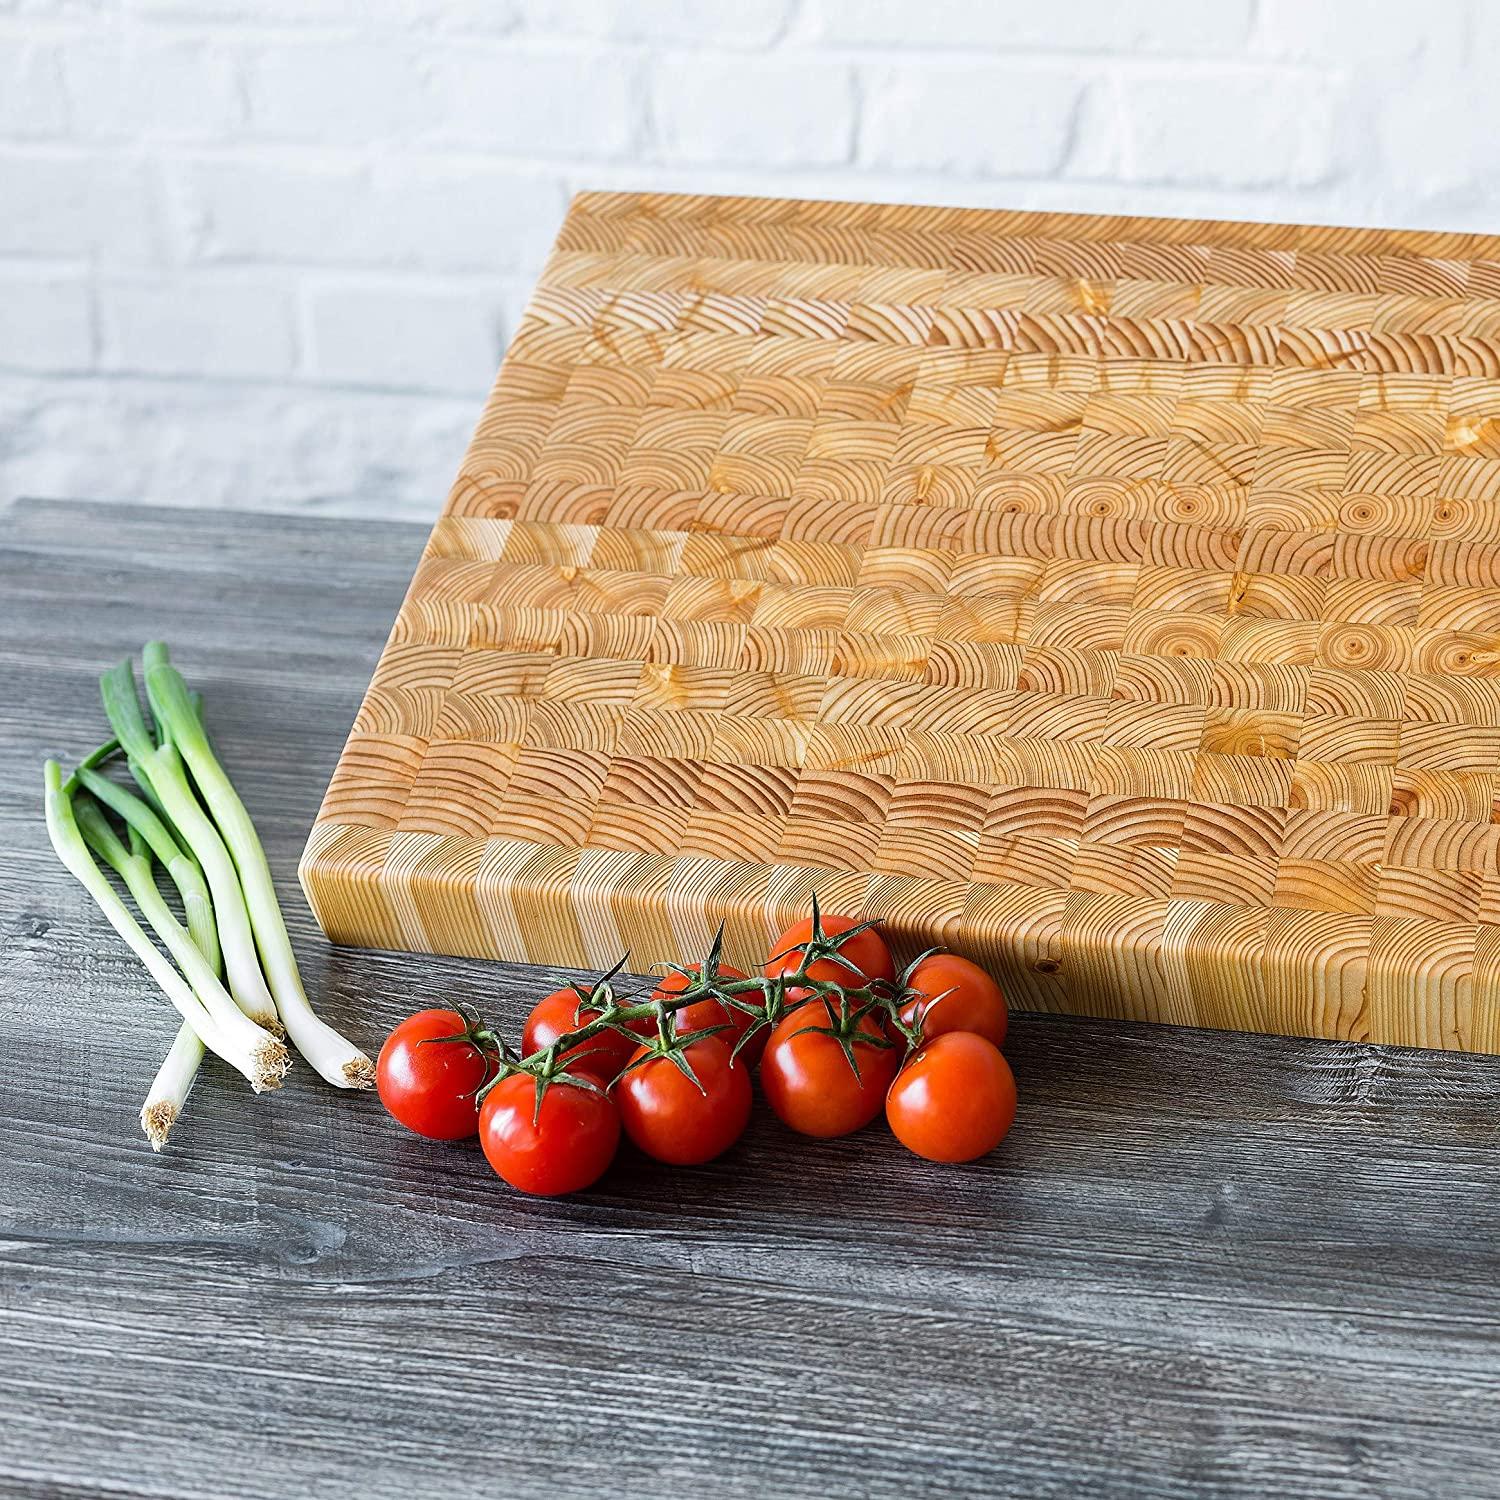 Why wooden chopping boards